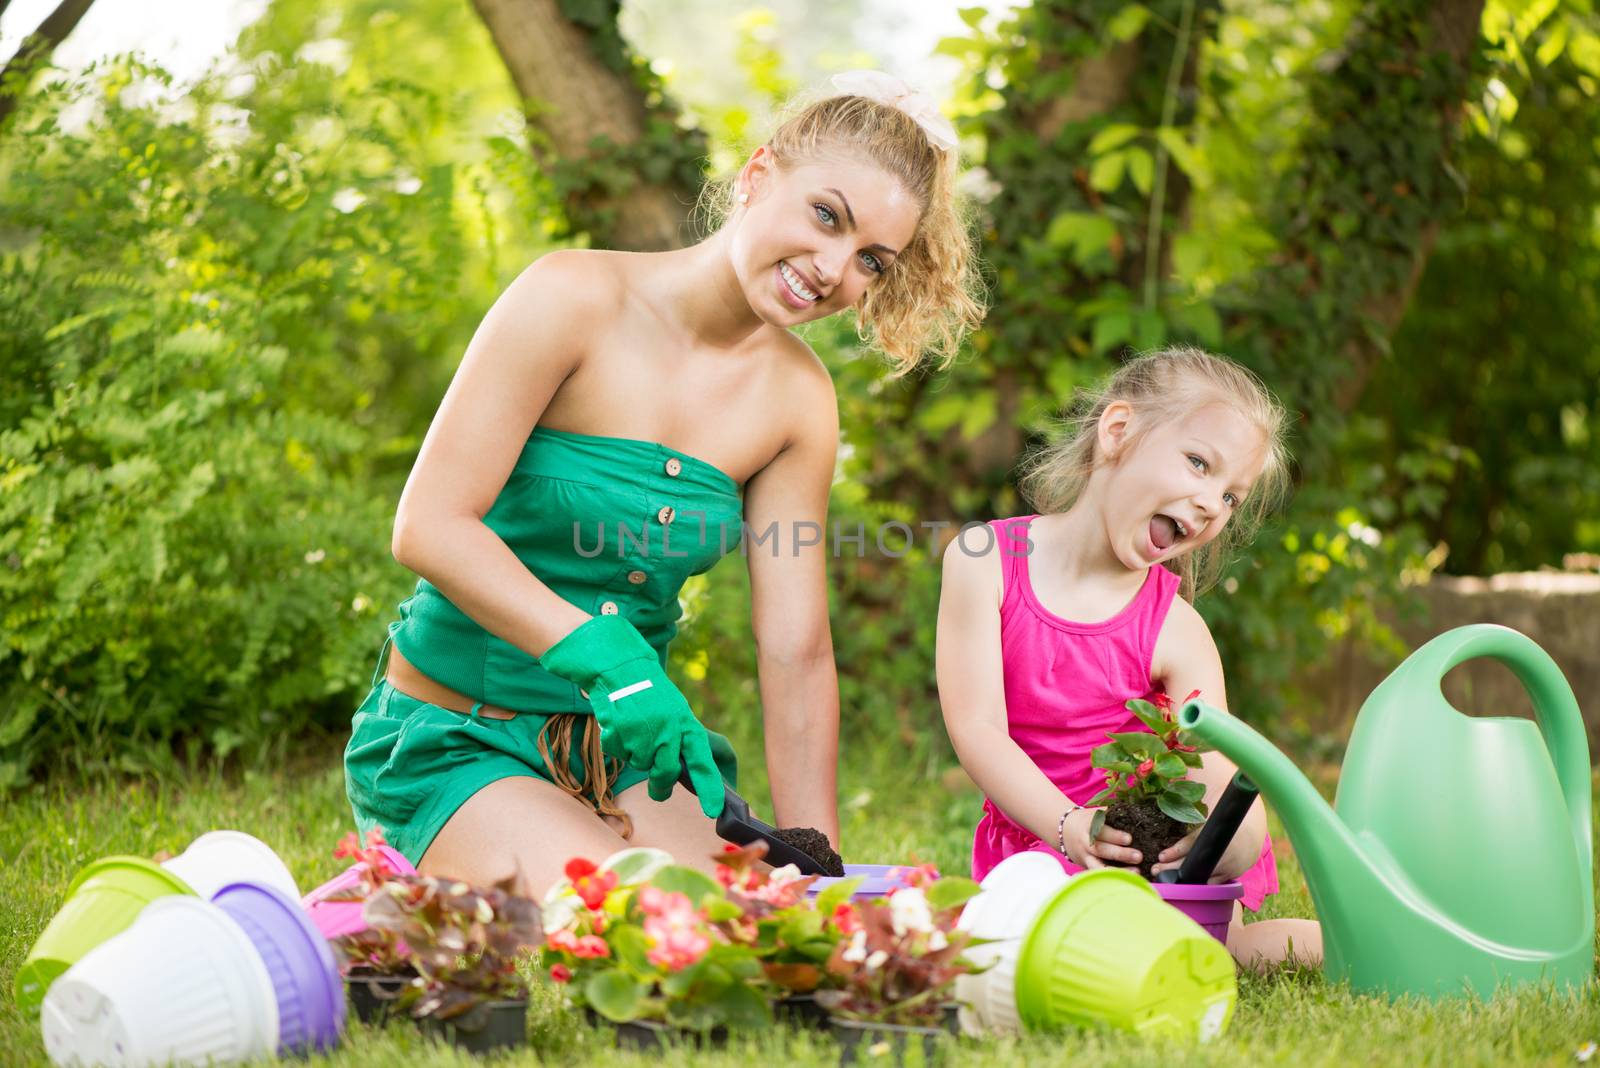 Beautiful mother and daughter planting flowers by MilanMarkovic78